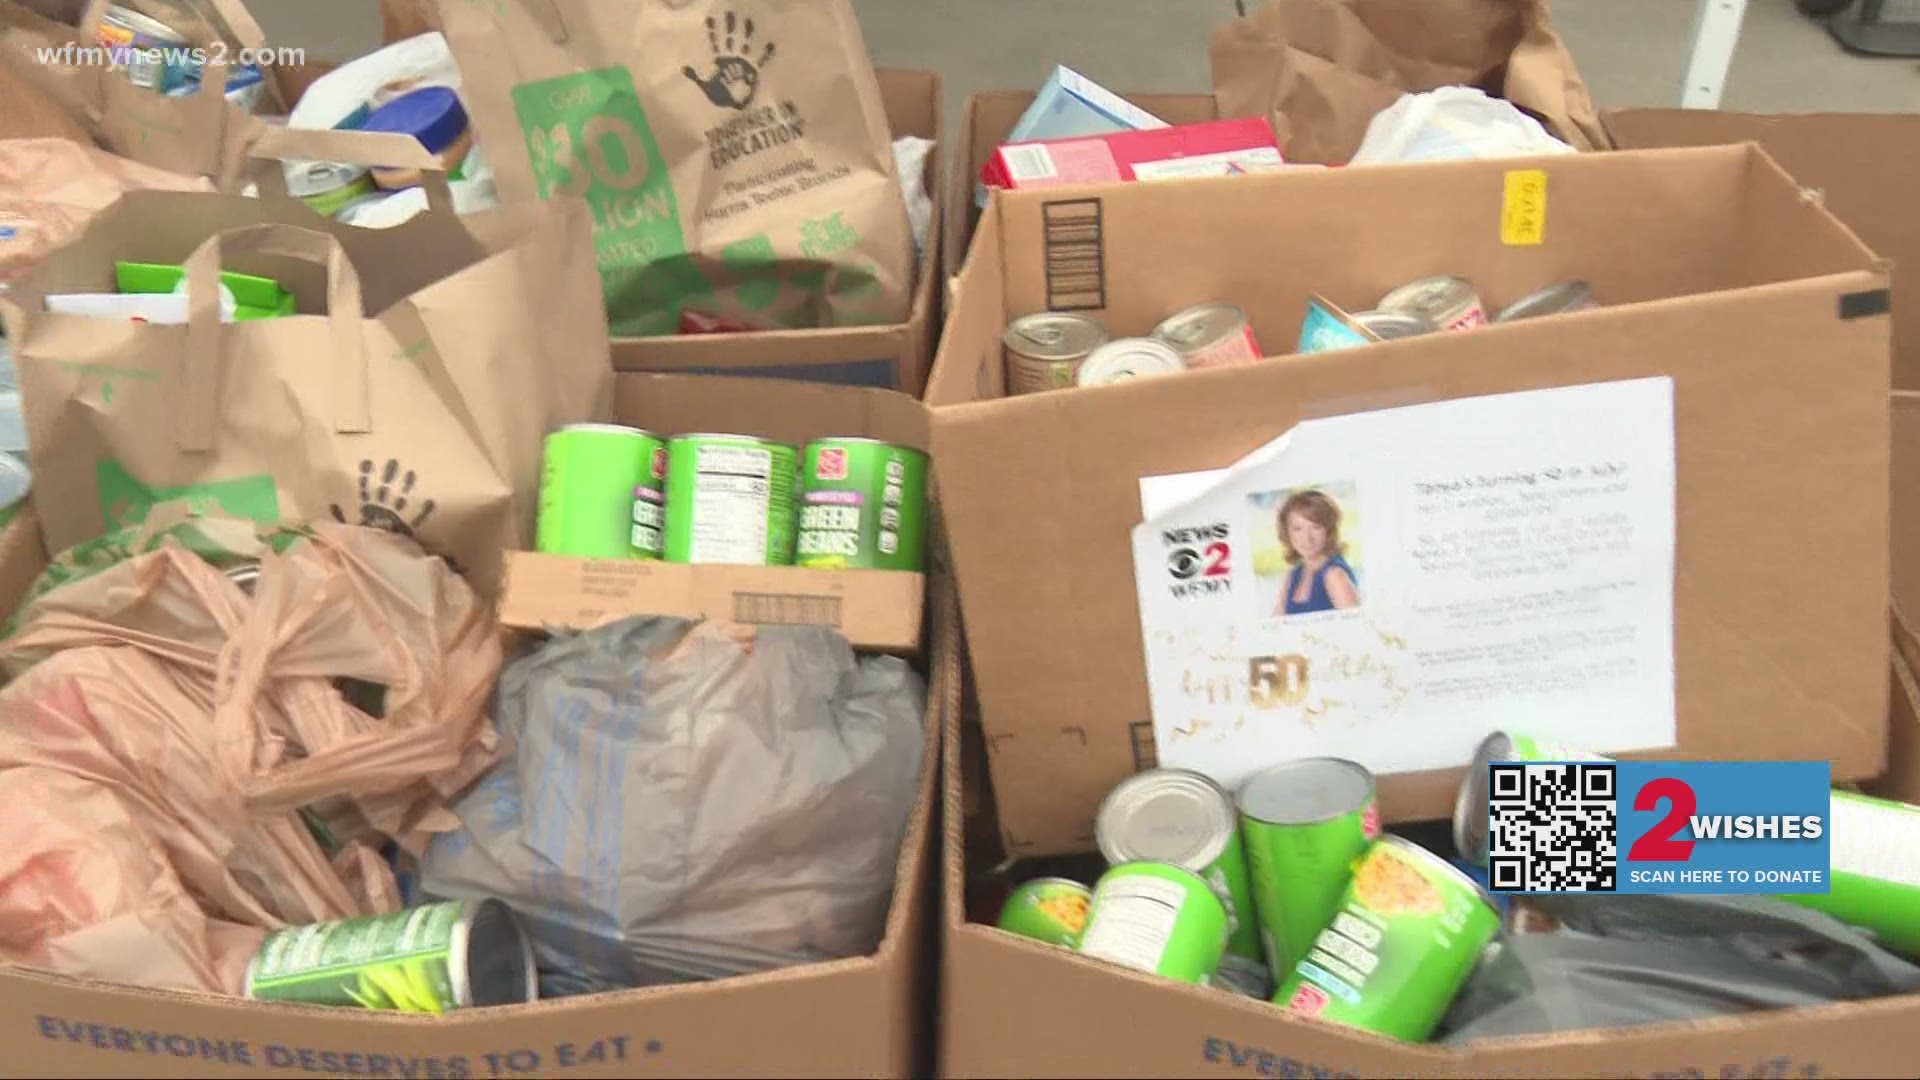 People showed up from around the Triad to help reach Tanya's goal of donating 50,000 meals.